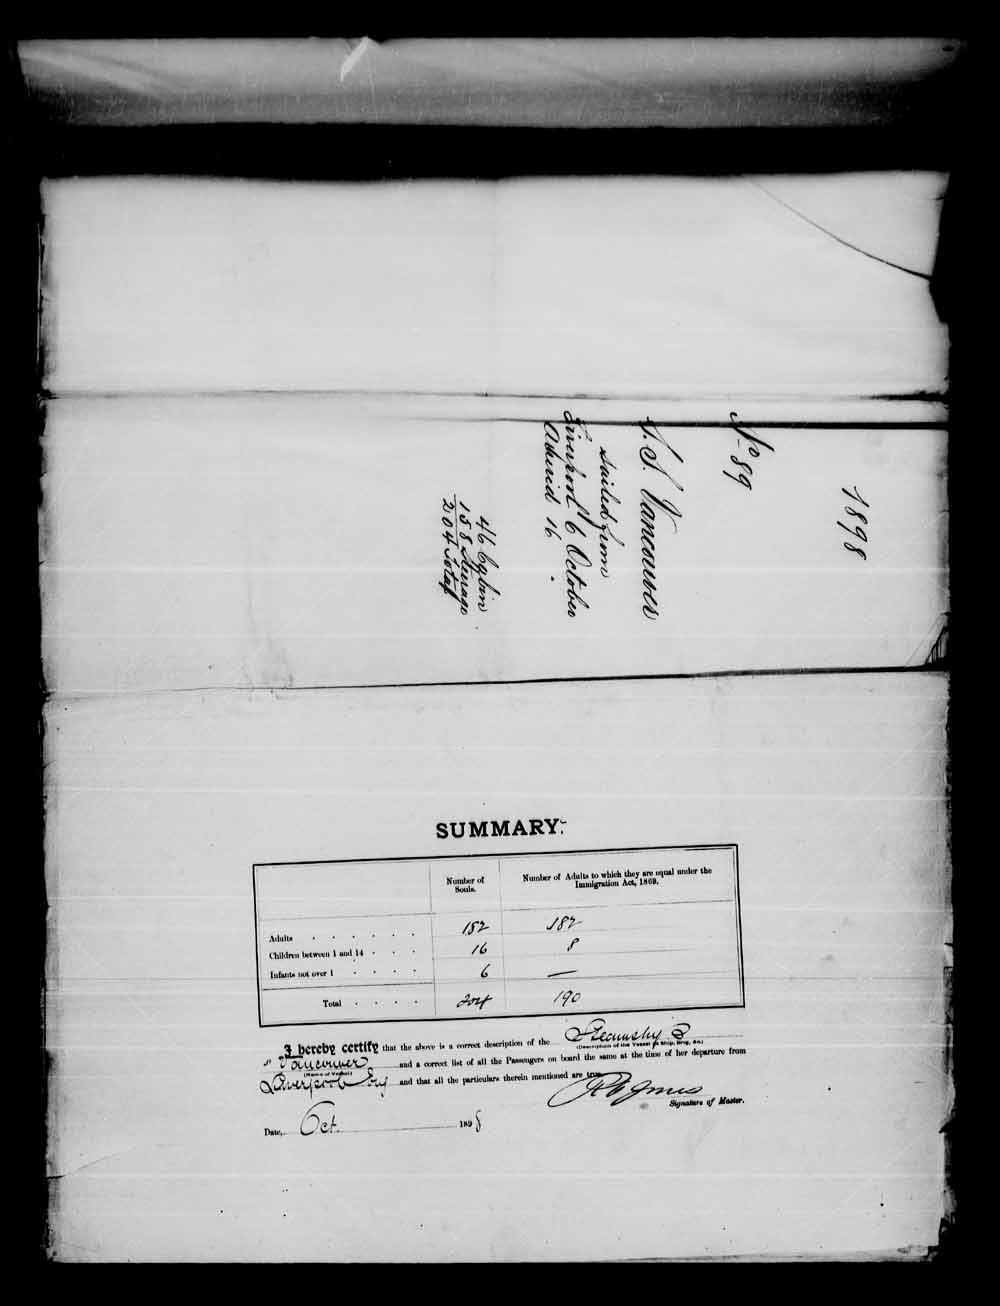 Digitized page of Passenger Lists for Image No.: e003555393